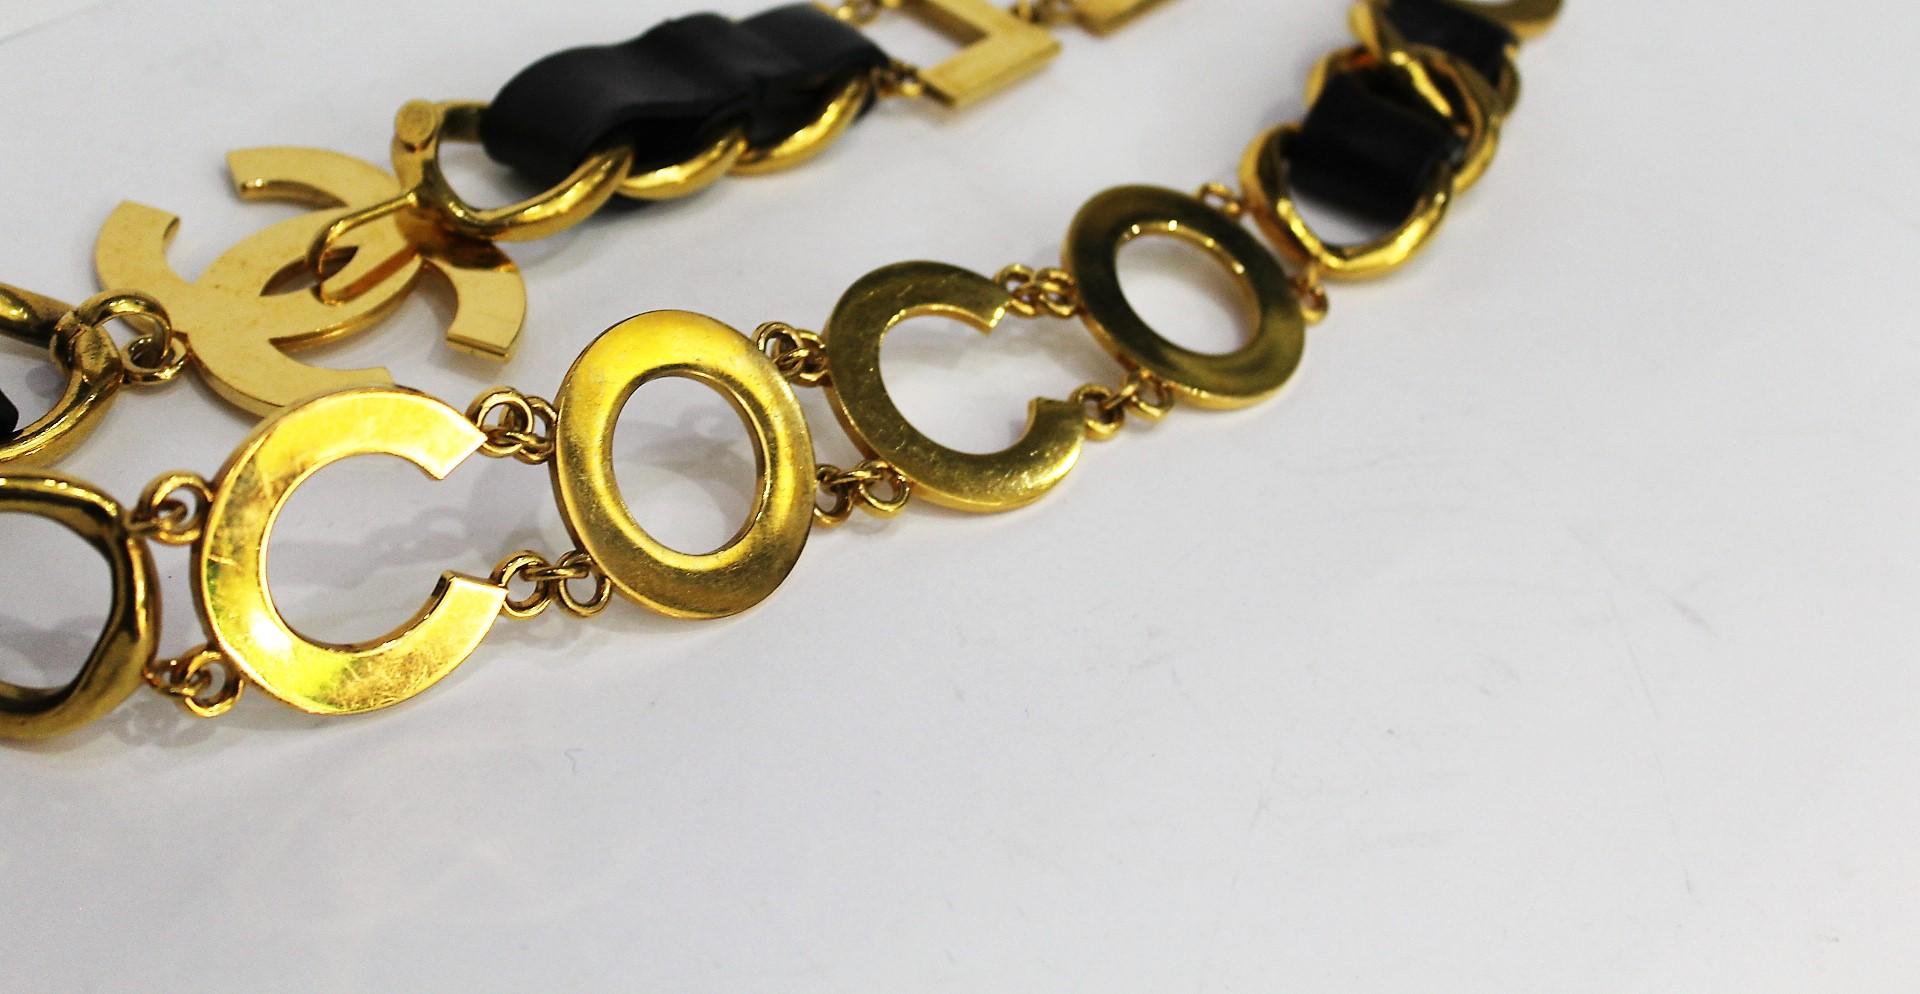 Authentic Chanel chain belt in black leather and gold tone.